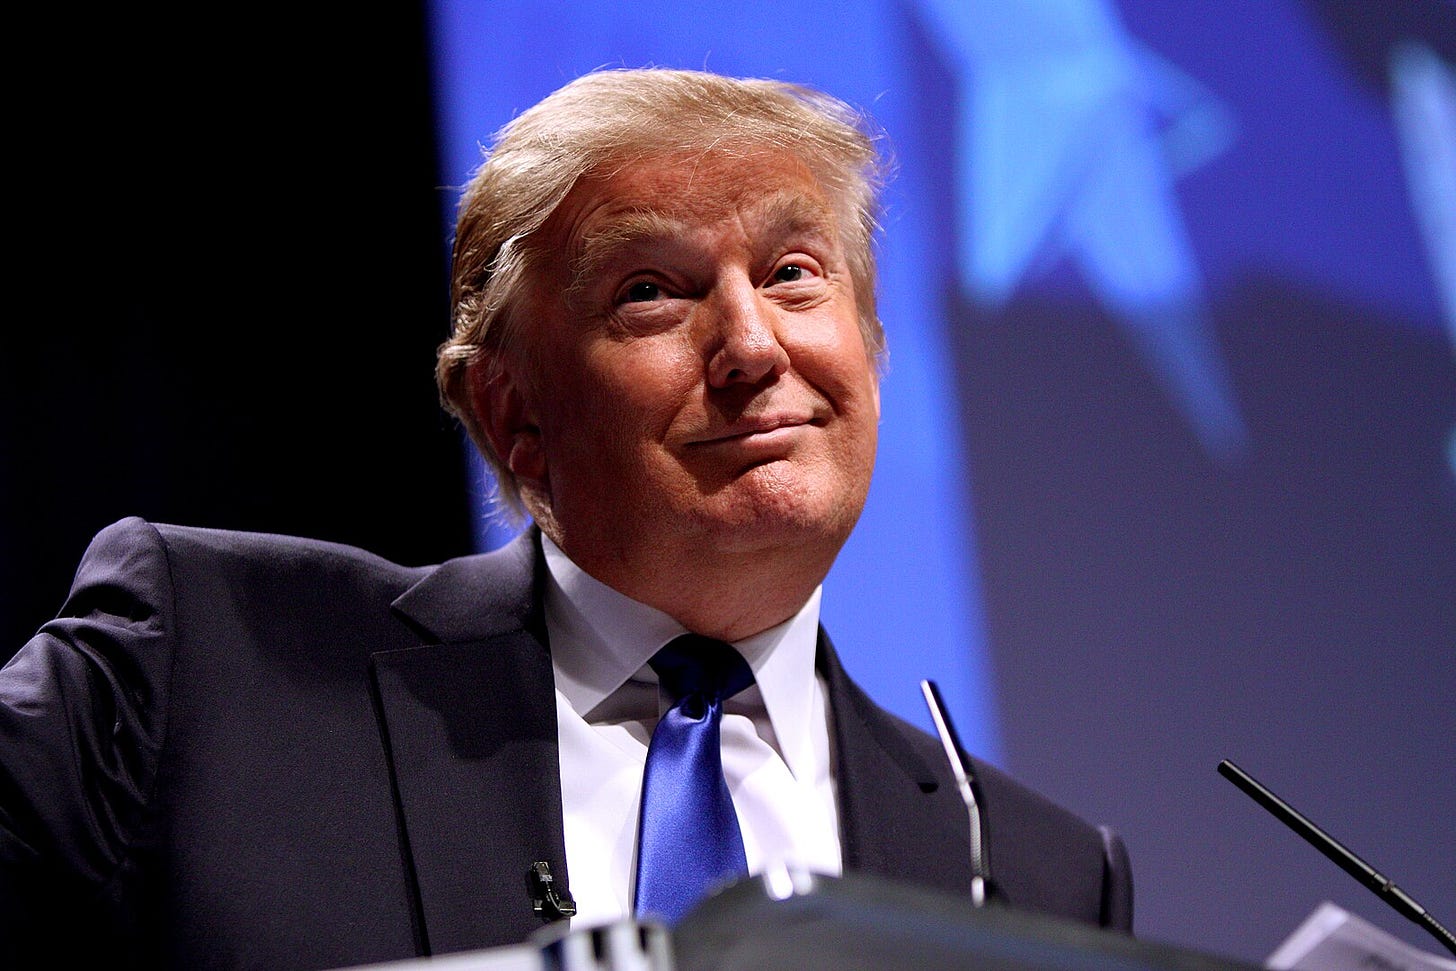 Is Donald Trump the unity candidate?